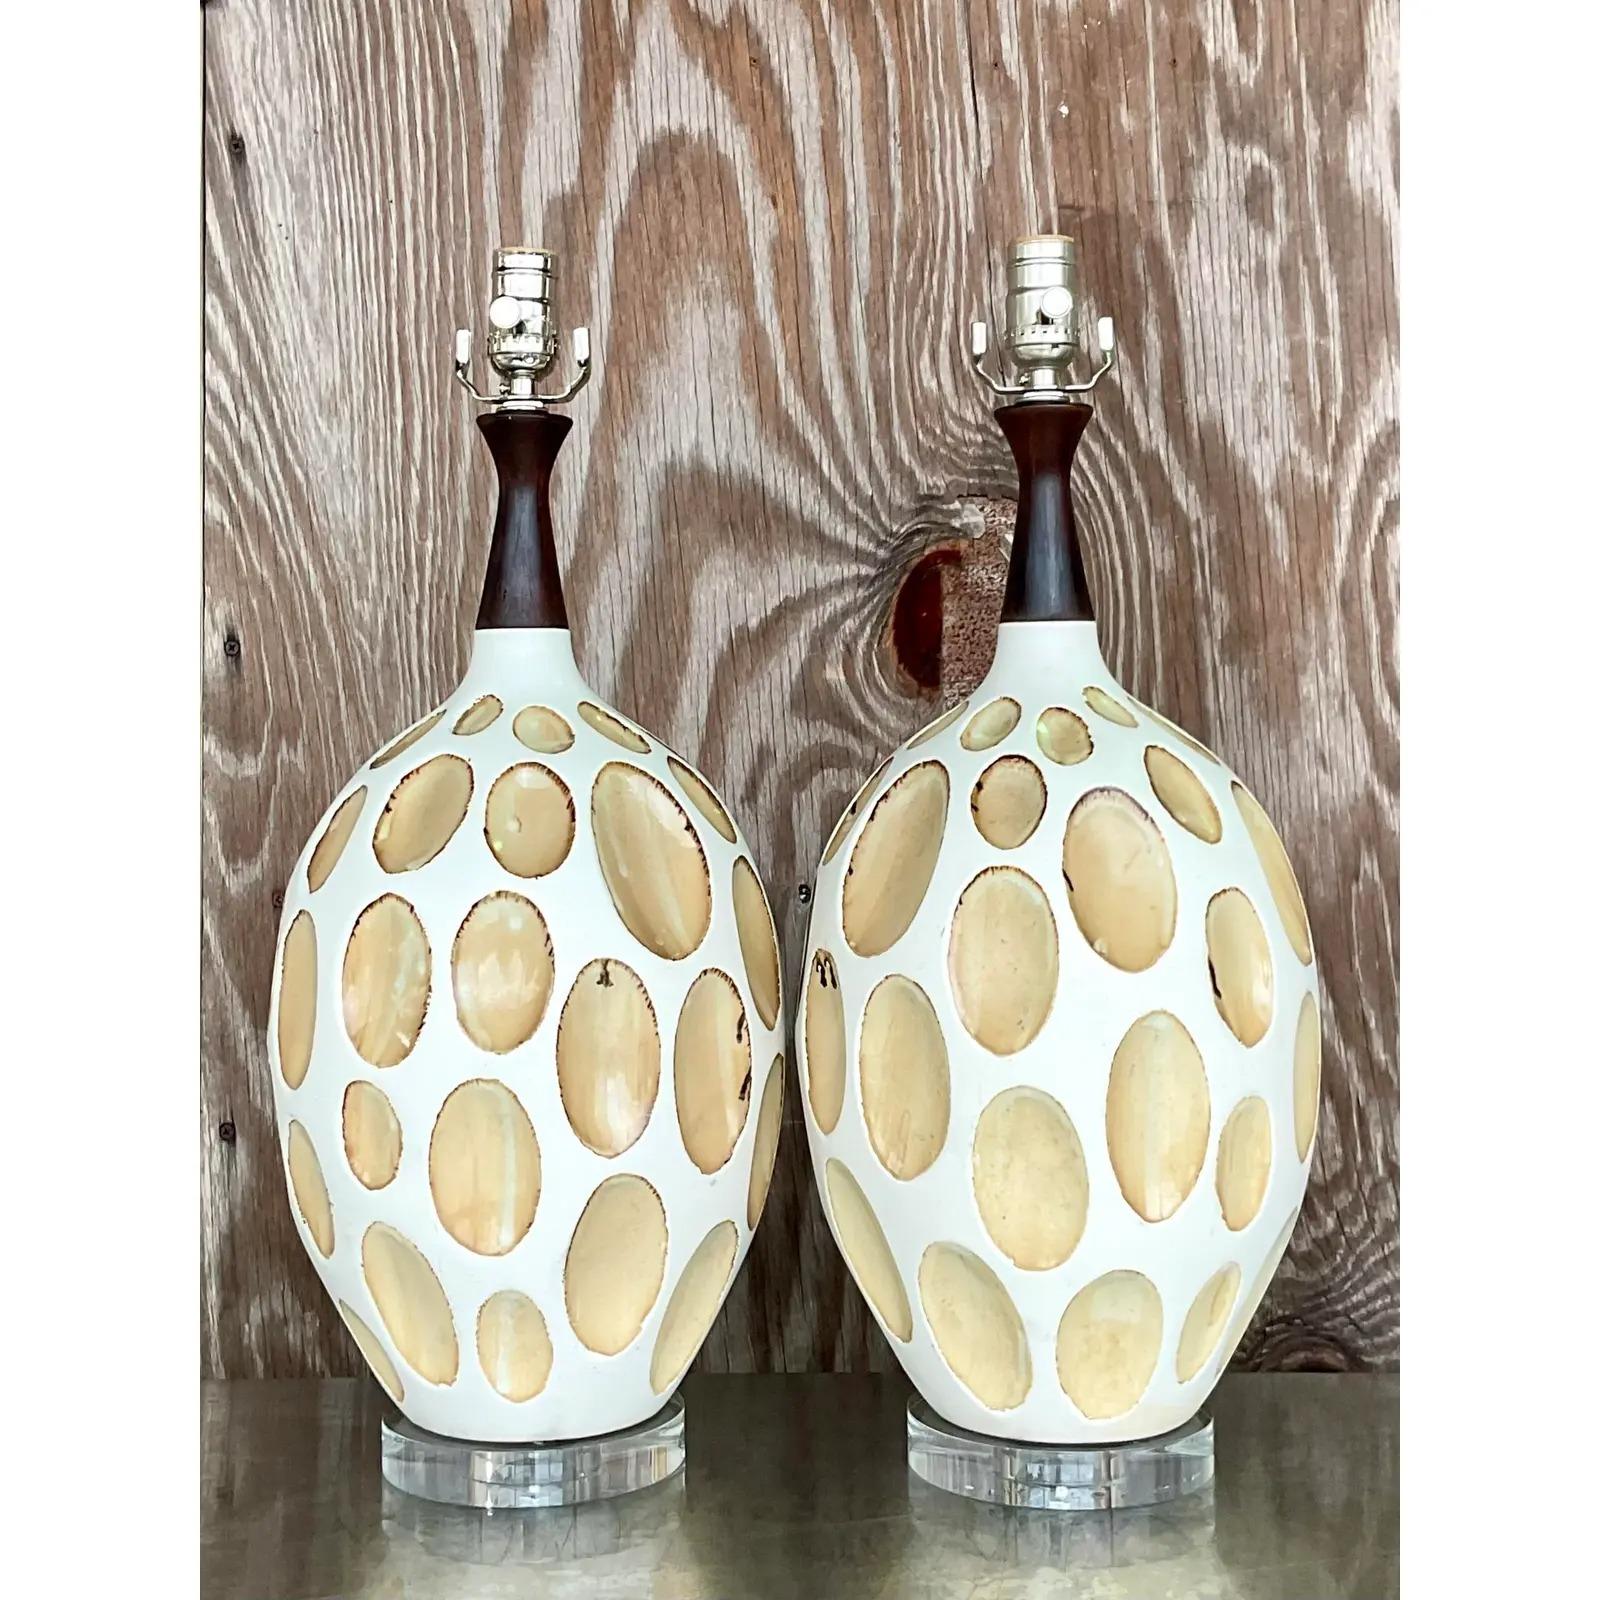 North American Vintage MCM Glazed Ceramic Crater Lamps, a Pair